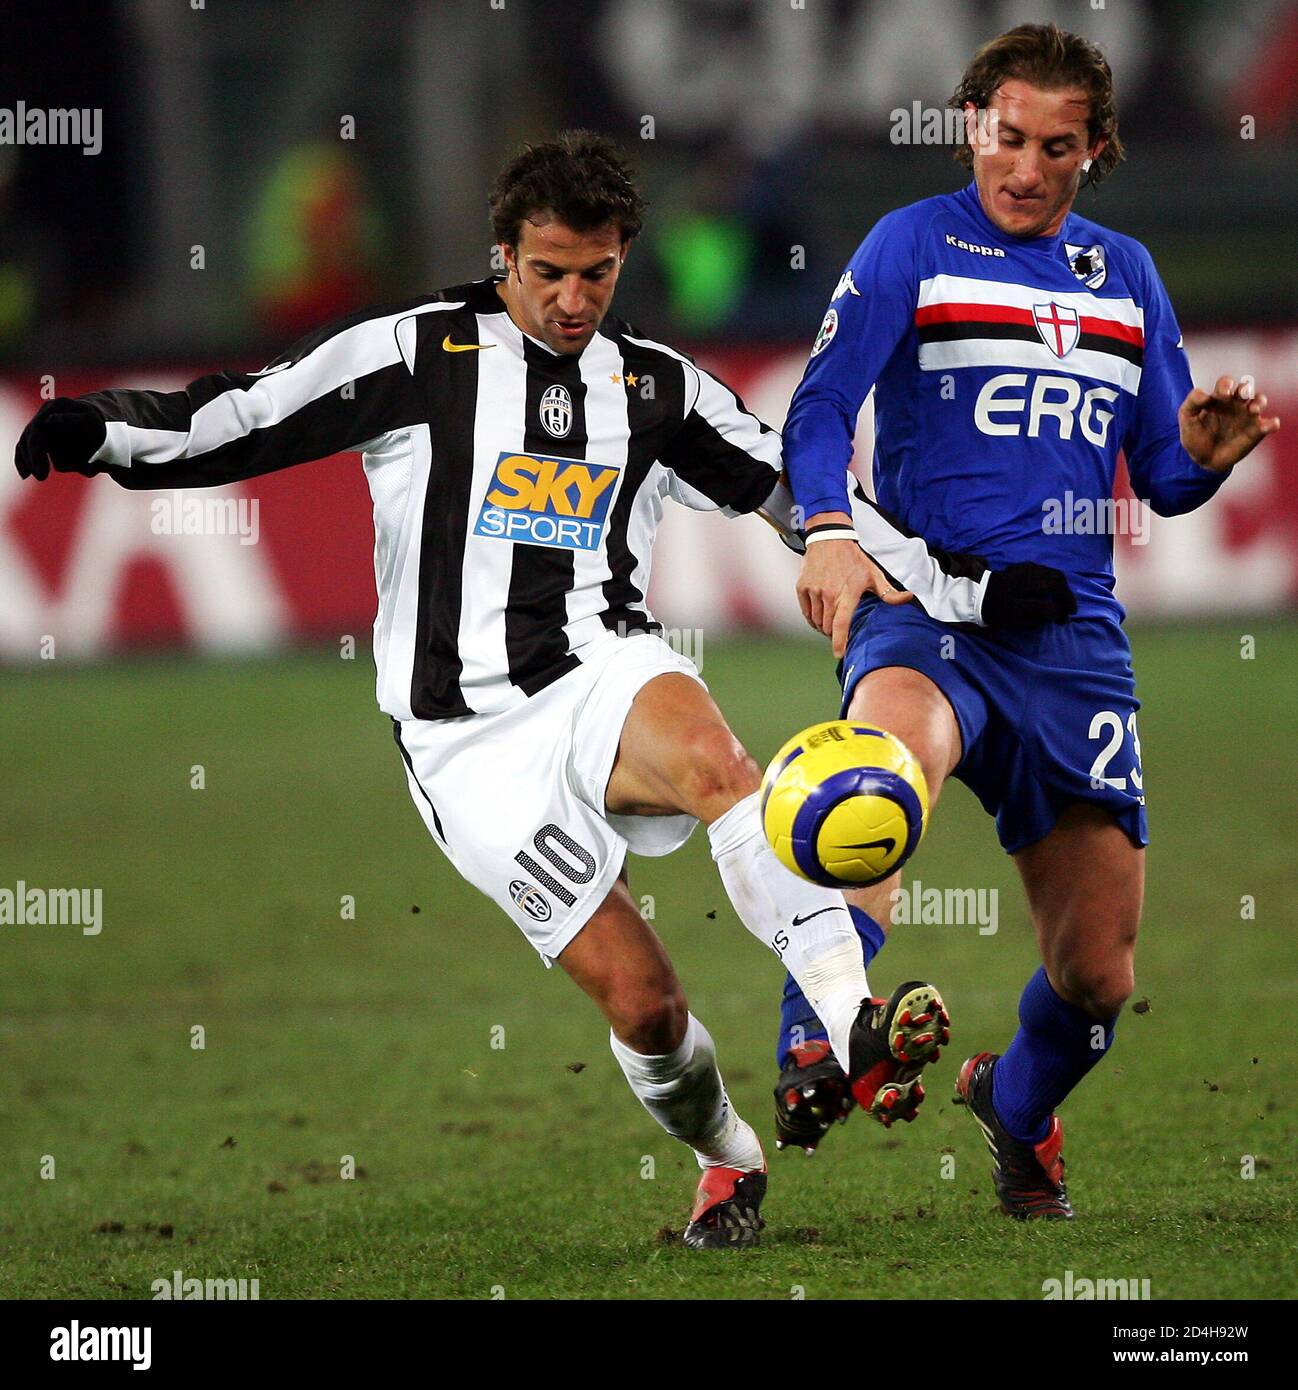 Juventus's Alessandro Del Piero (L) challenges Aimo Diana (R) of Sampdoria  during their Serie A match at the Delle Alpi stadium in Turin, northern  Italy, February 2, 2005. REUTERS/Daniele La Monaca DLM/THI